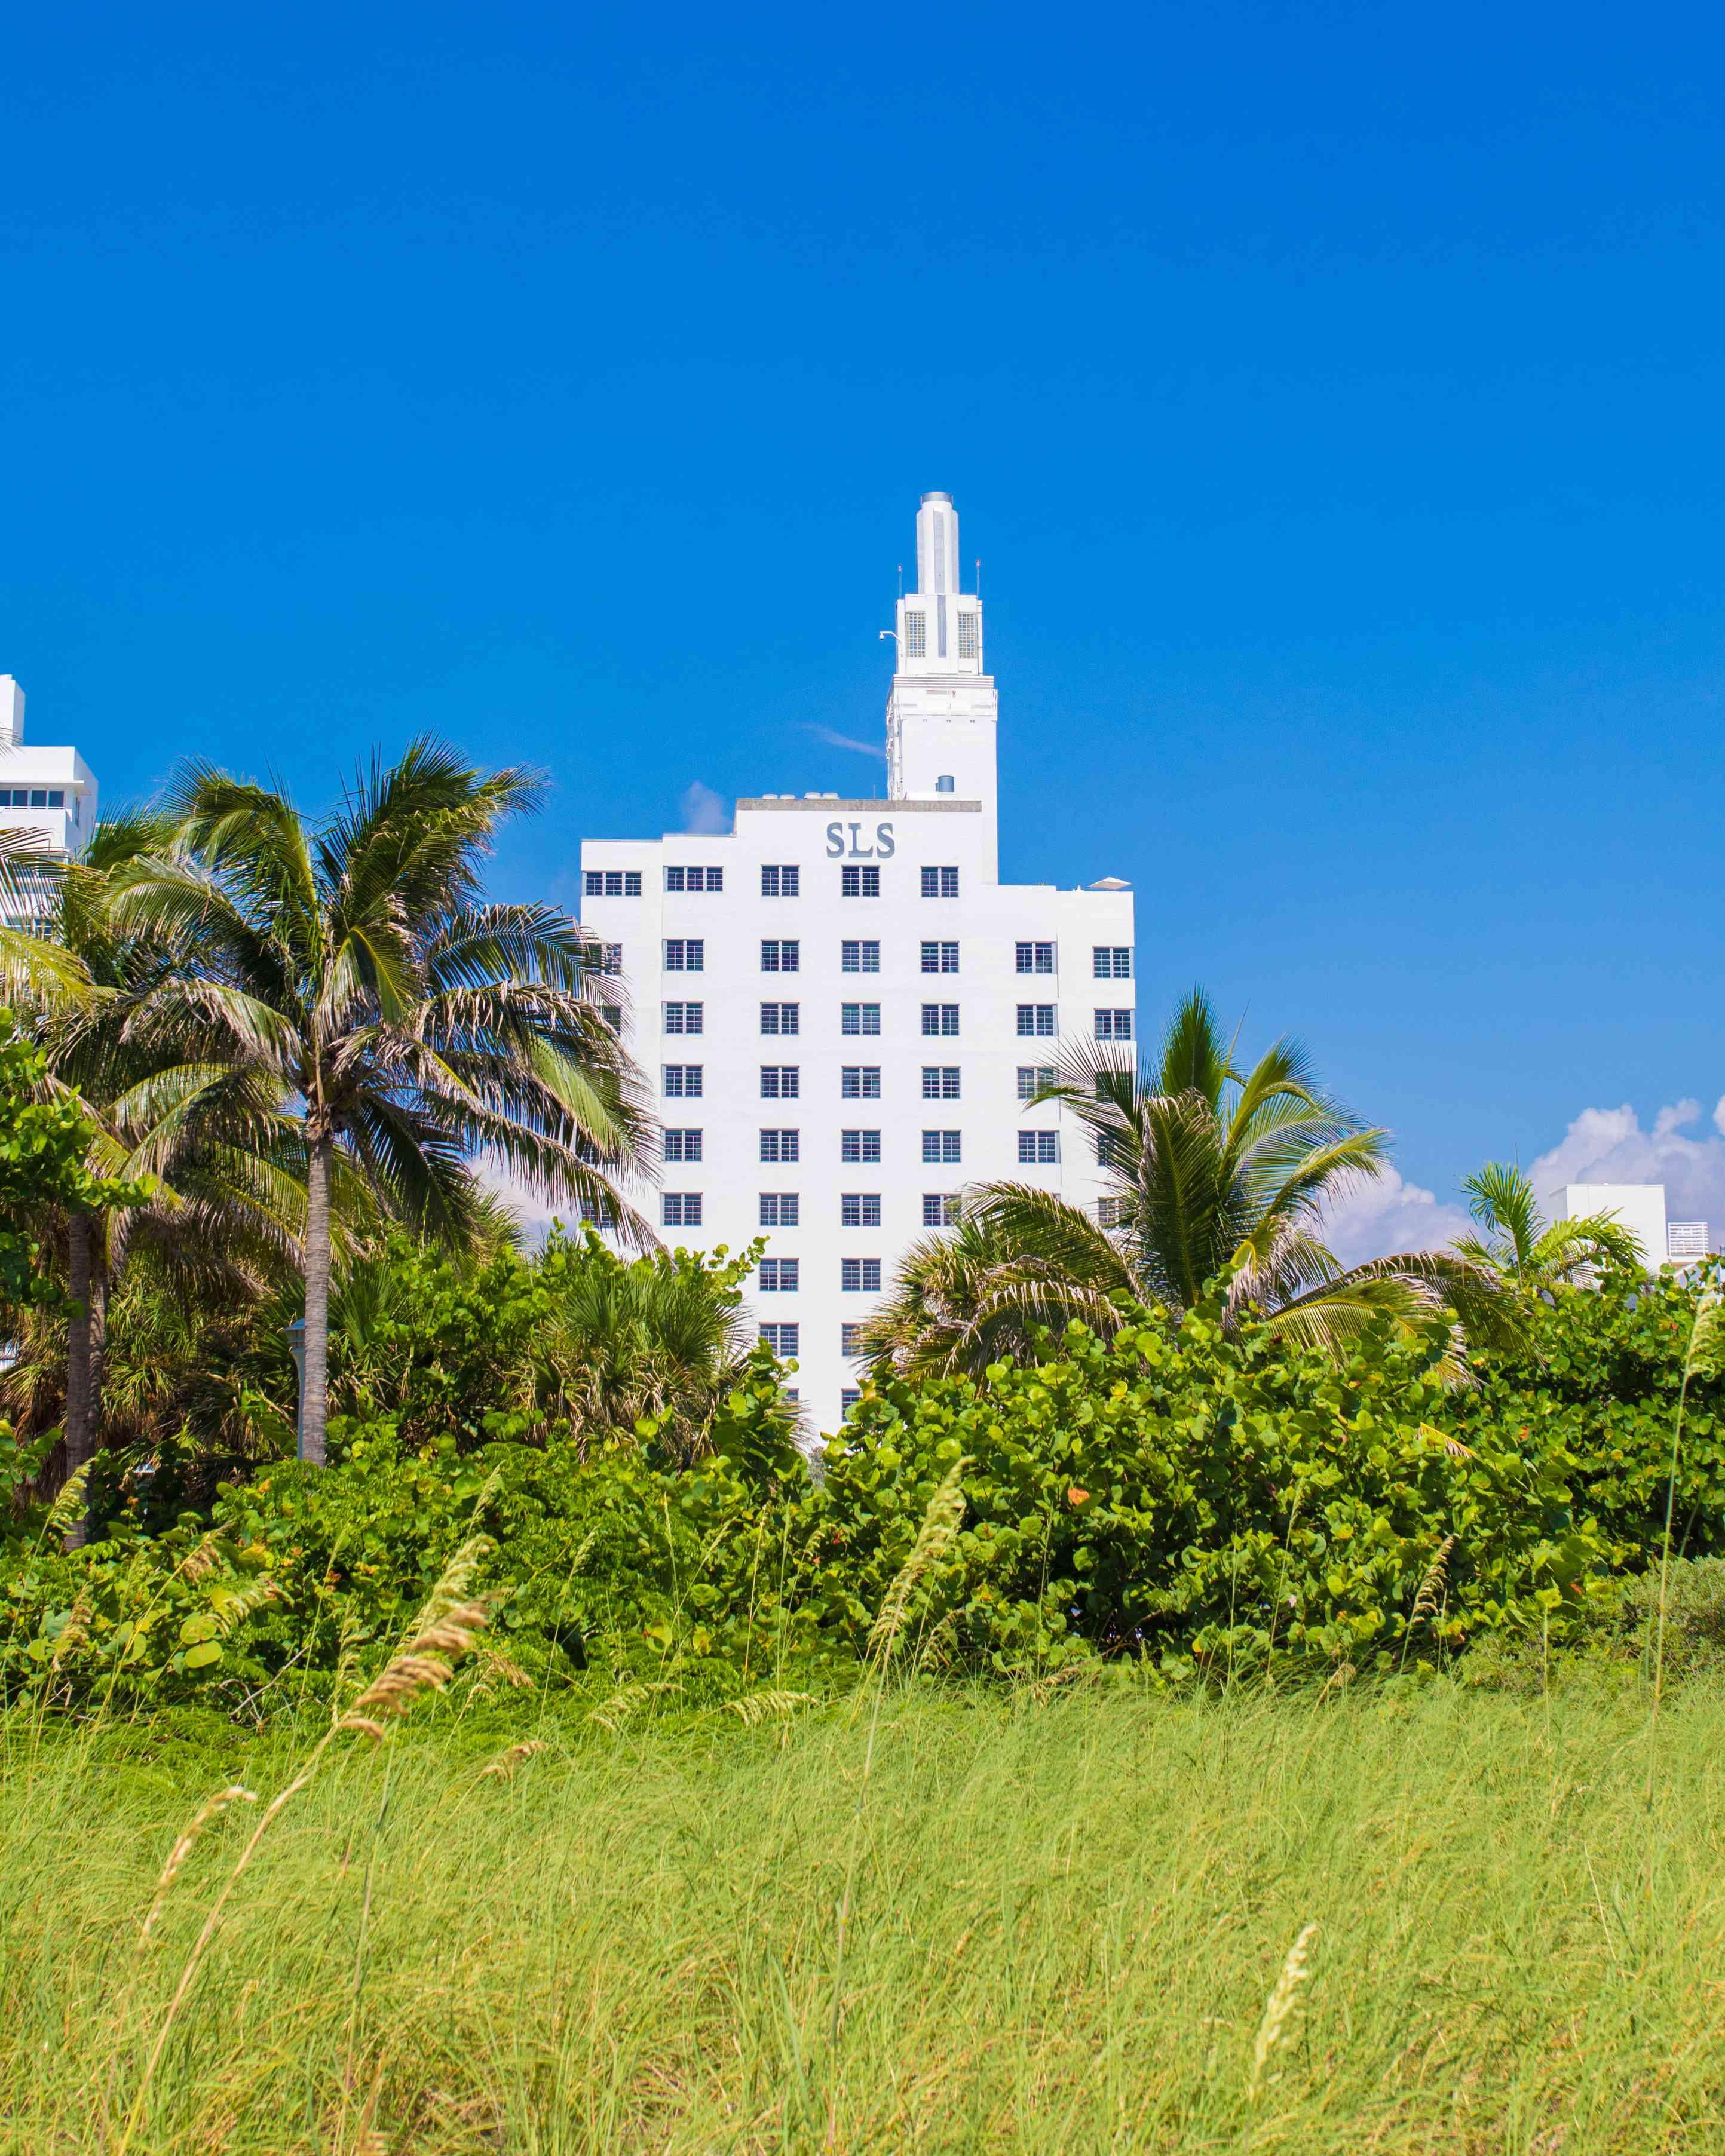 SLS South Beach Tower against green grass and palm trees